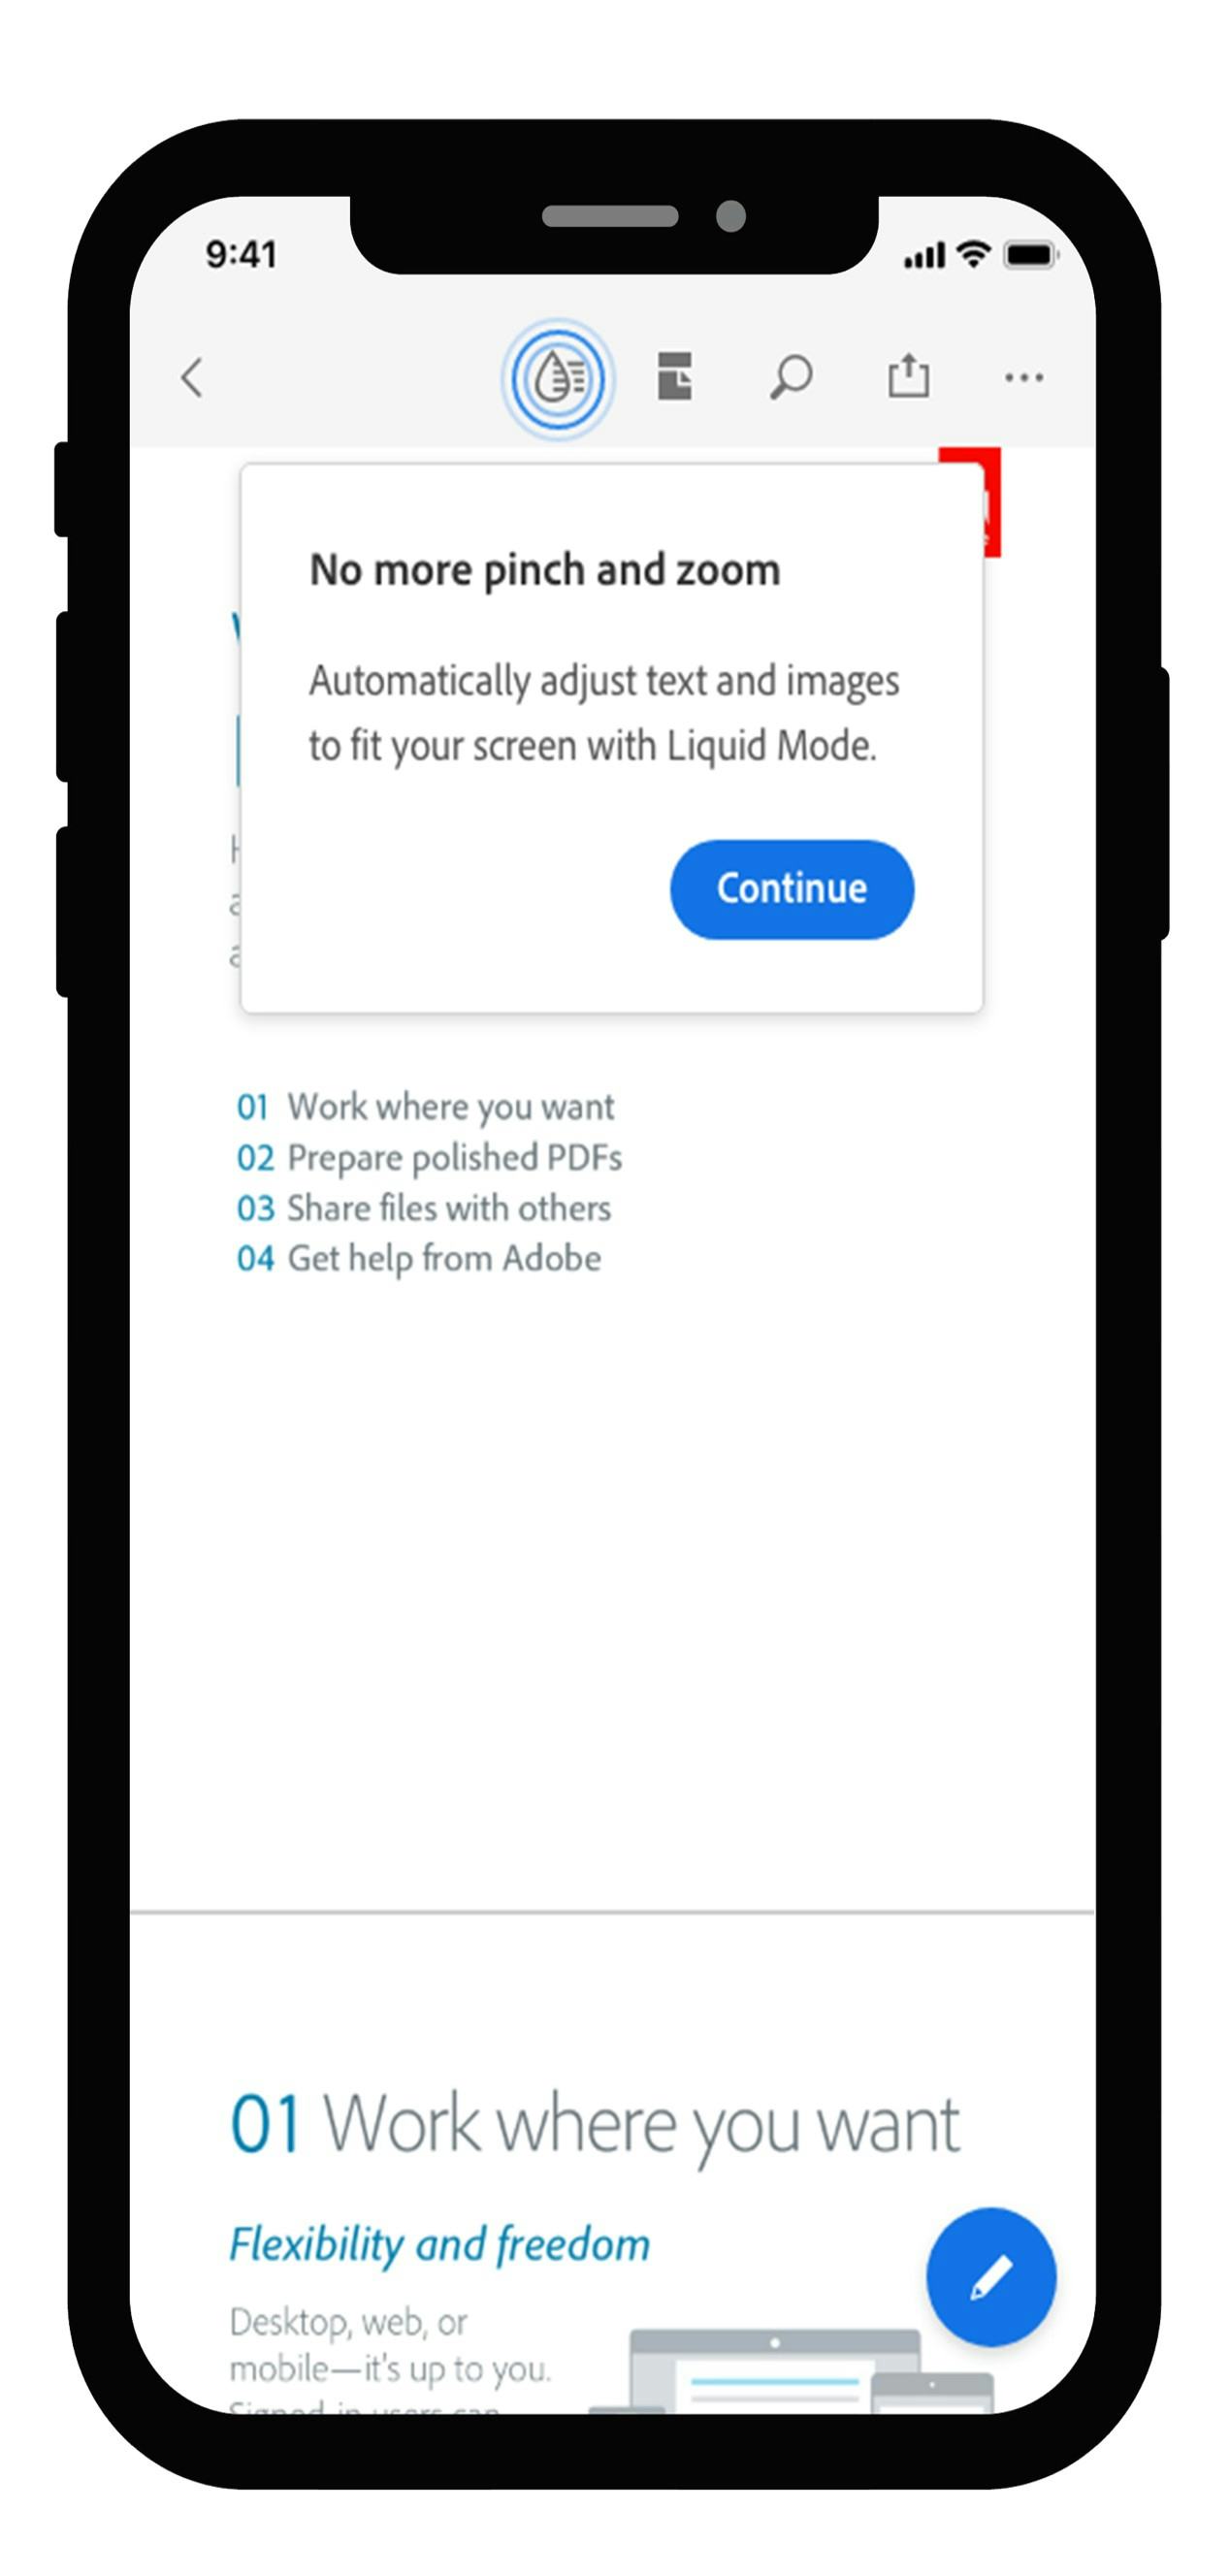 Adobe Acrobat Software - With Liquid Mode in Adobe Acrobat Reader mobile app, you can effortlessly read PDFs on phones and tablets without having to pinch and zoom.  Quickly navigate lengthy documents with intelligent outline and search tools, while maximizing readability.